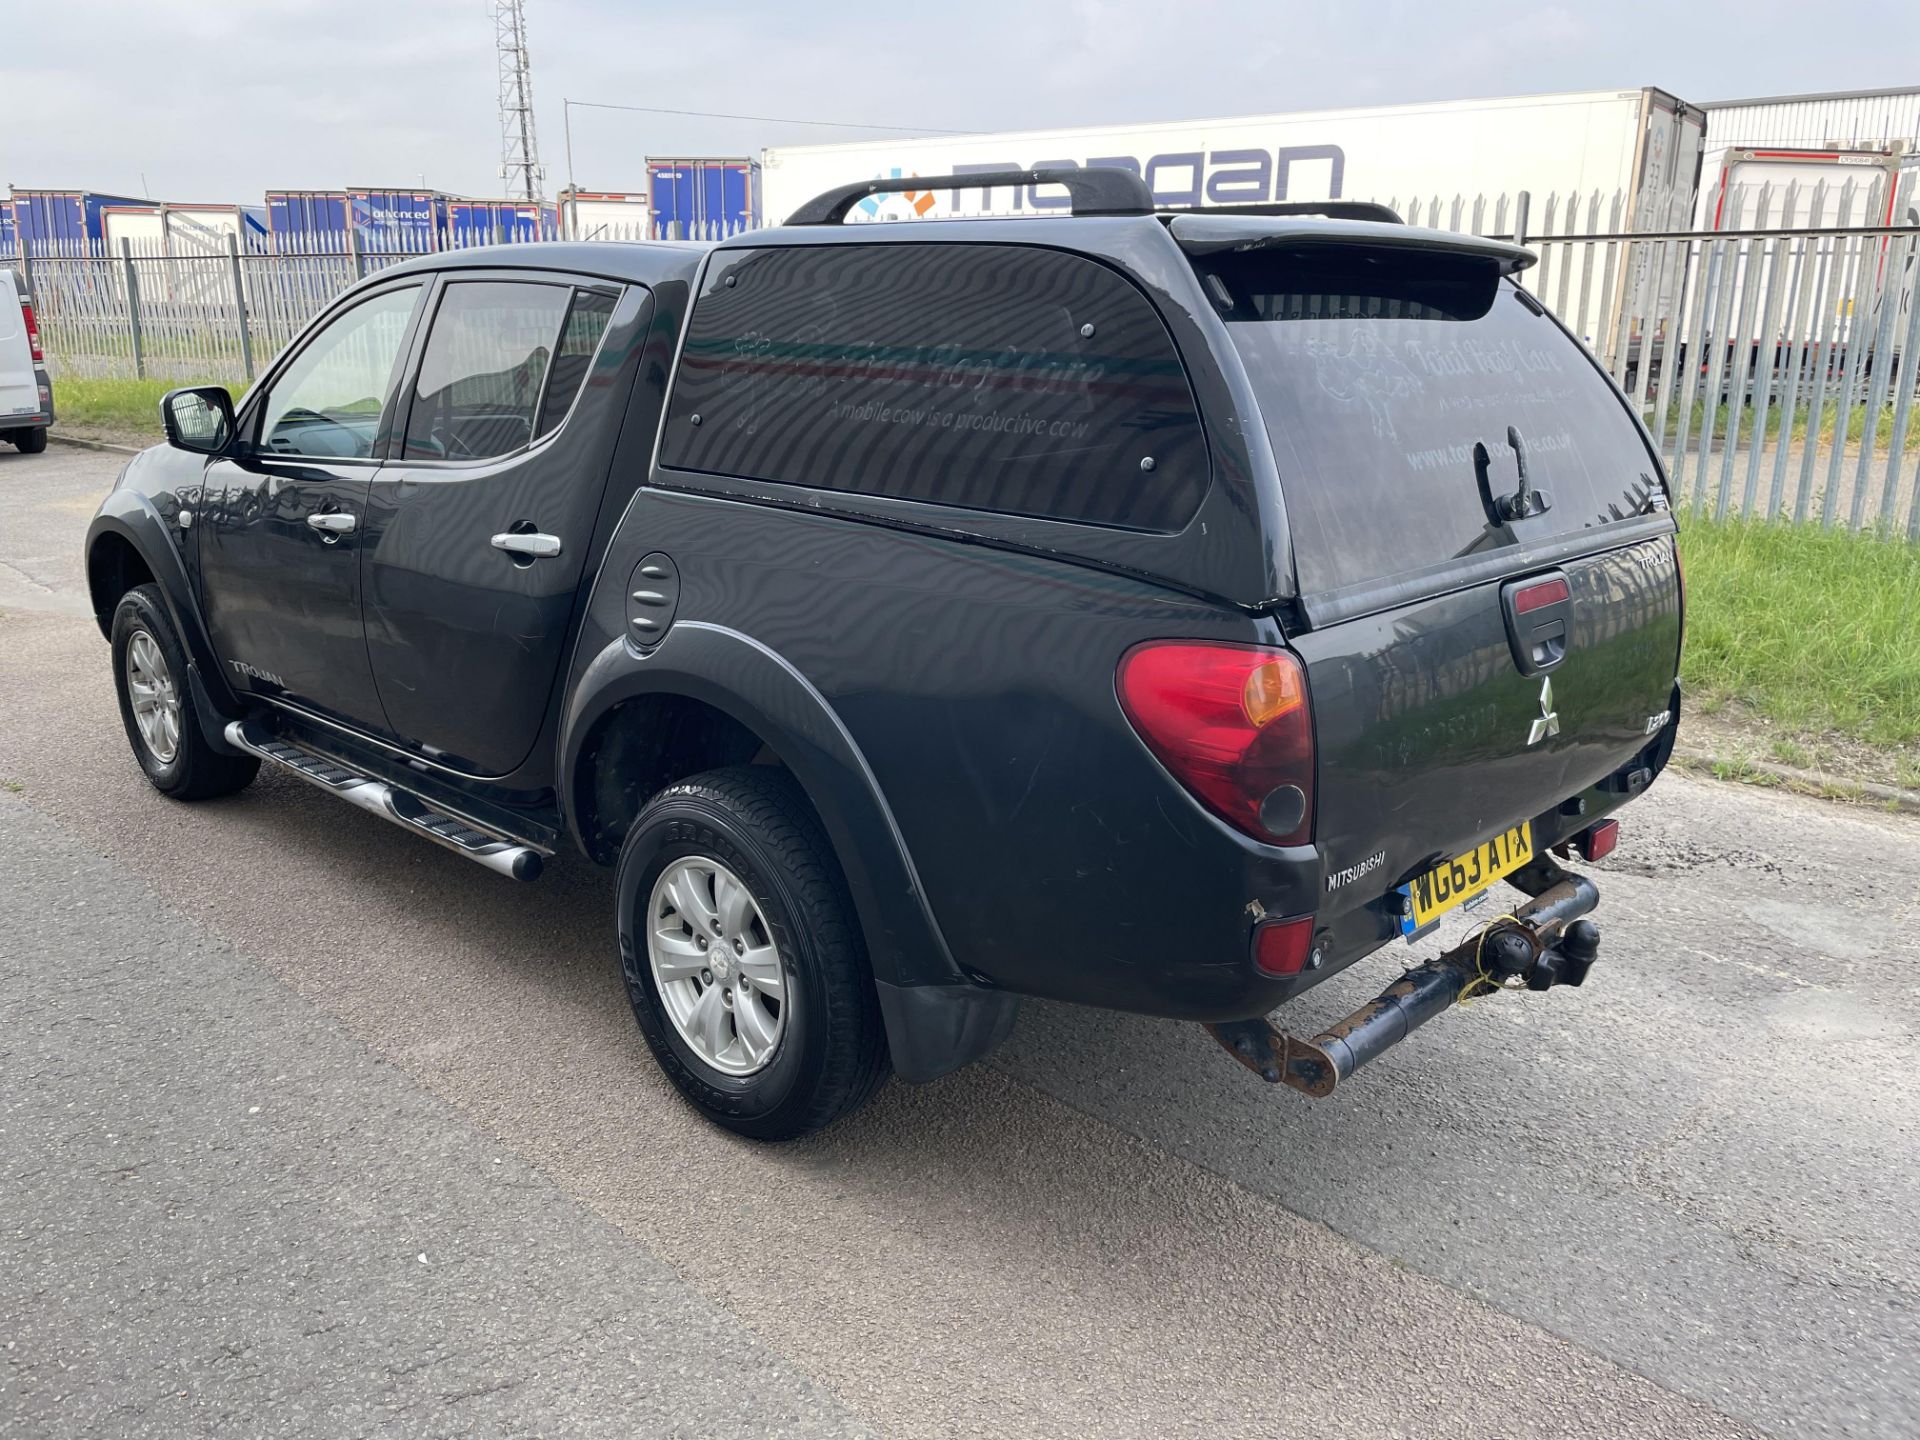 2013 Mitsubishi L200 Pickup with Carry Boy - CL505 - Ref: VVS031 - Location: Corby, - Image 5 of 12